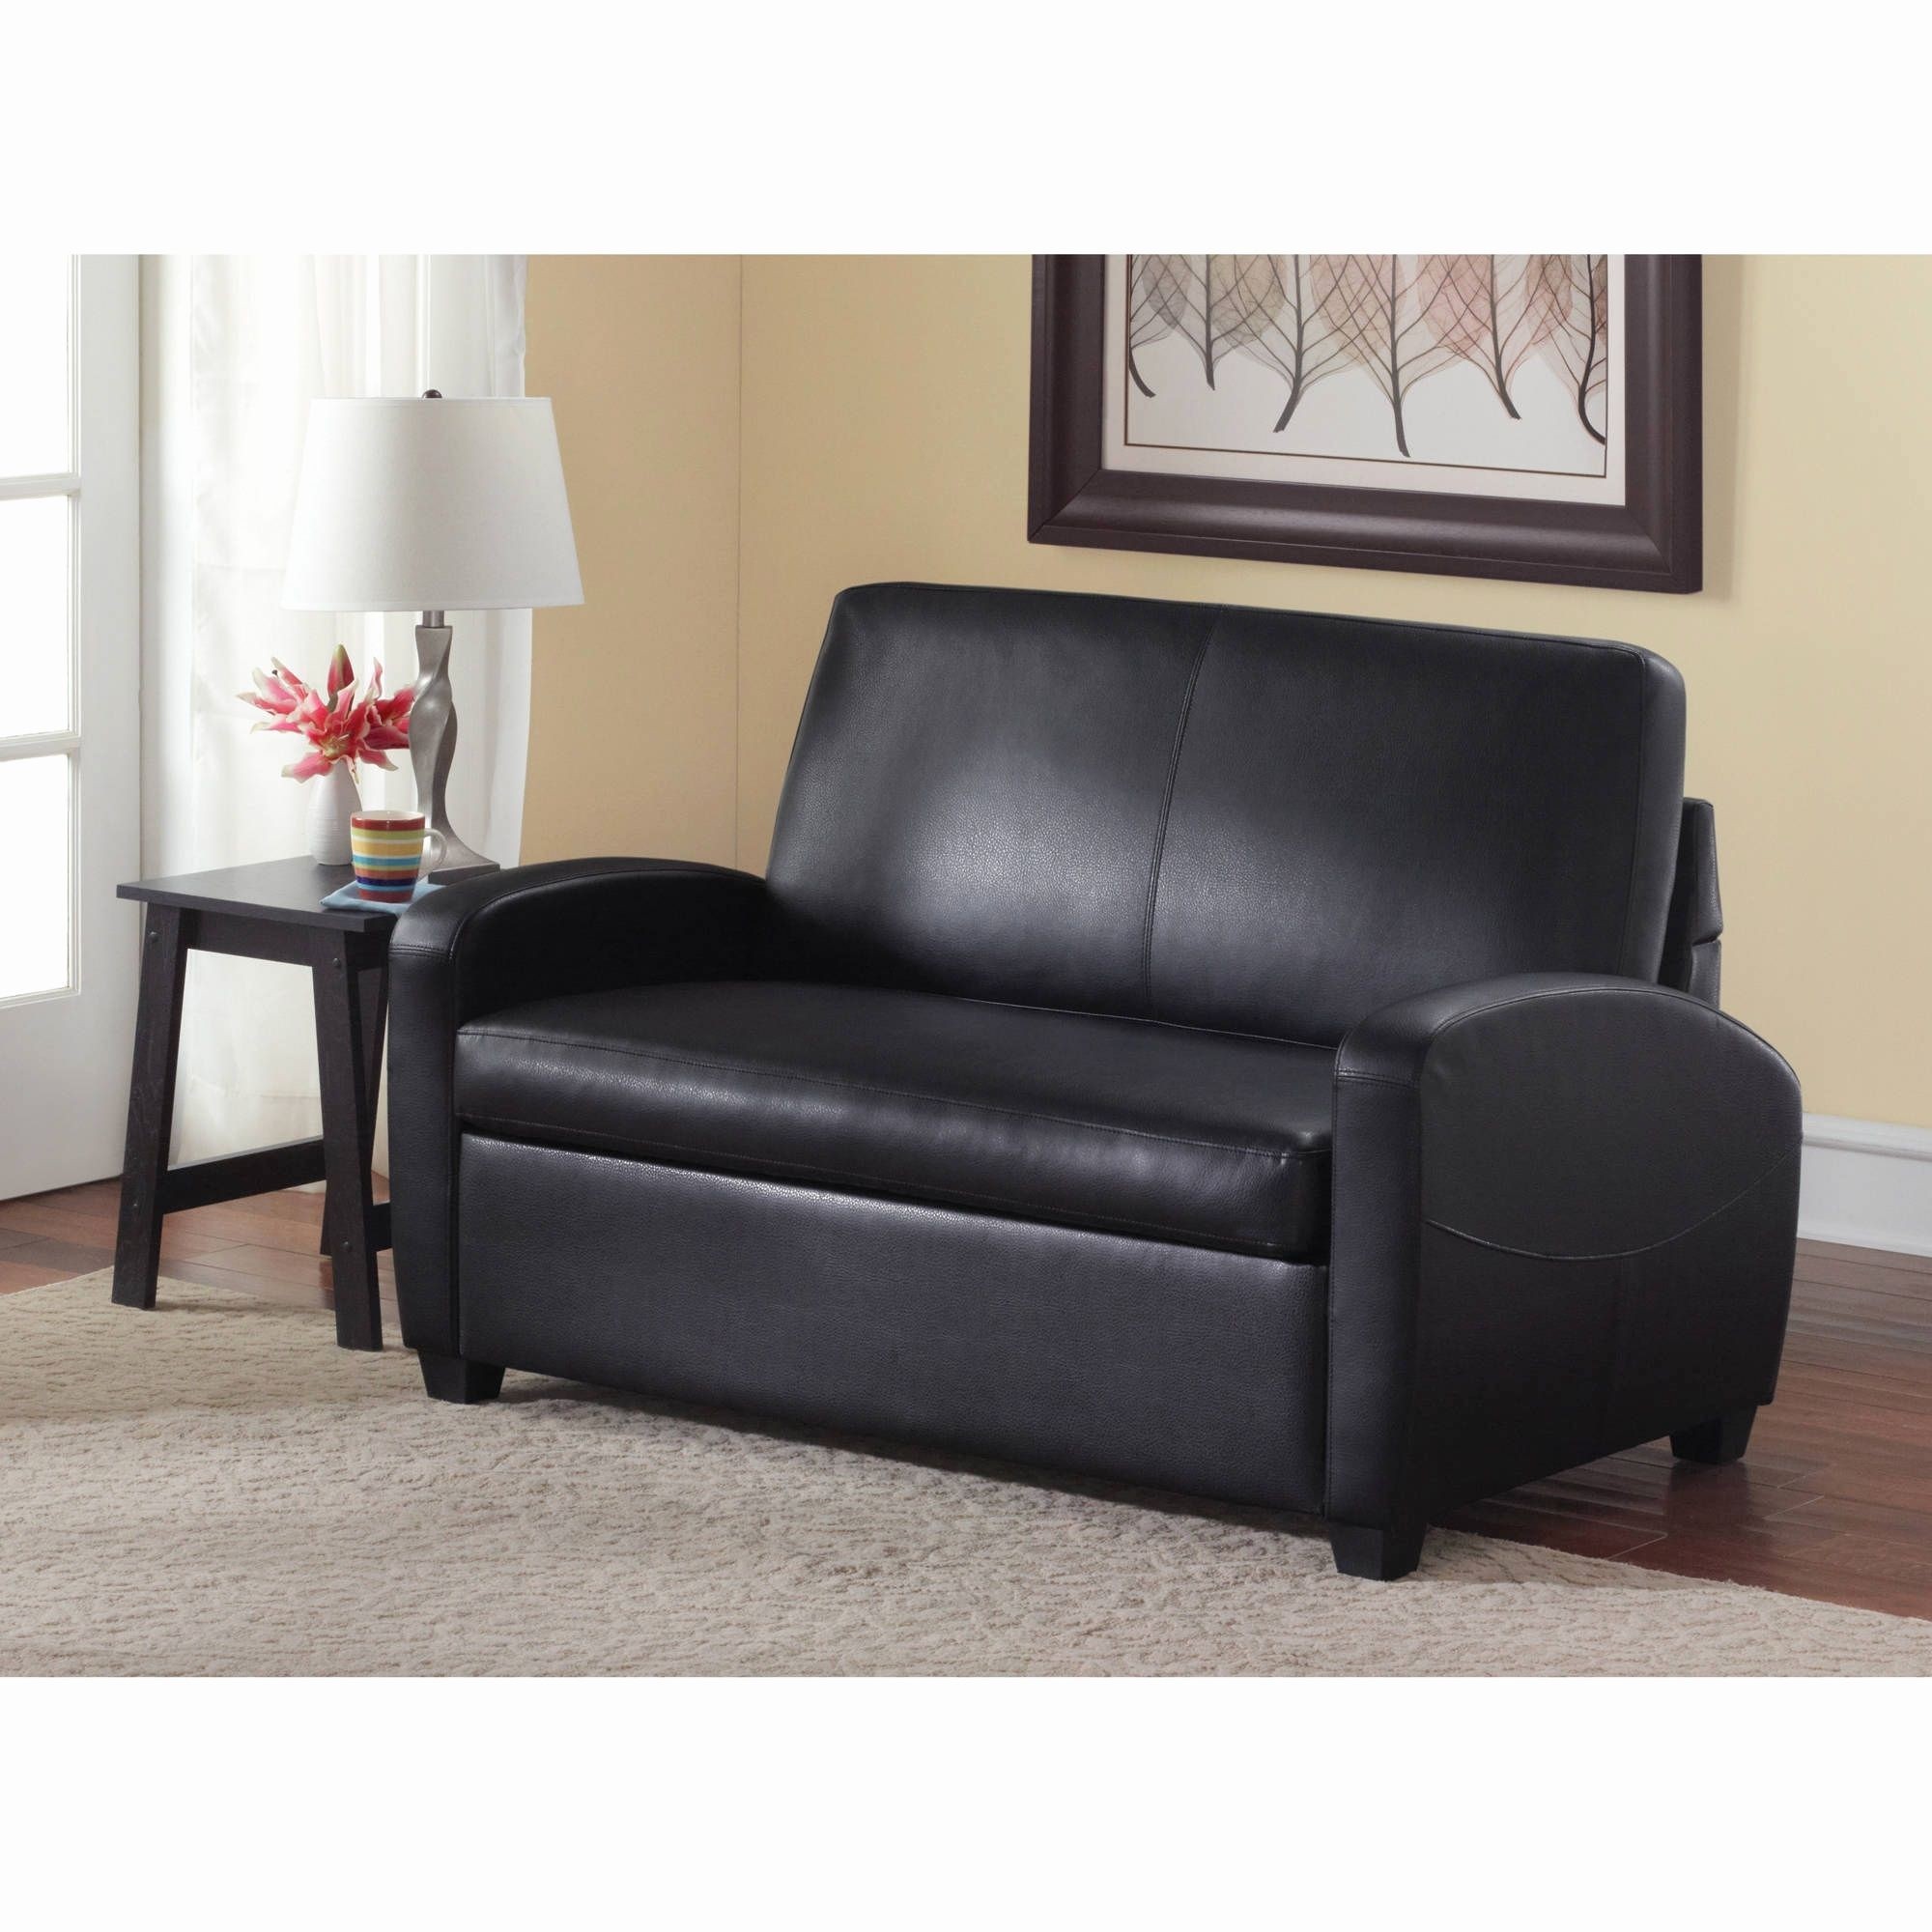 Sofa Sleeper Convertible Couch Loveseat Chair Recliner Futon Black Twin Bed Guest